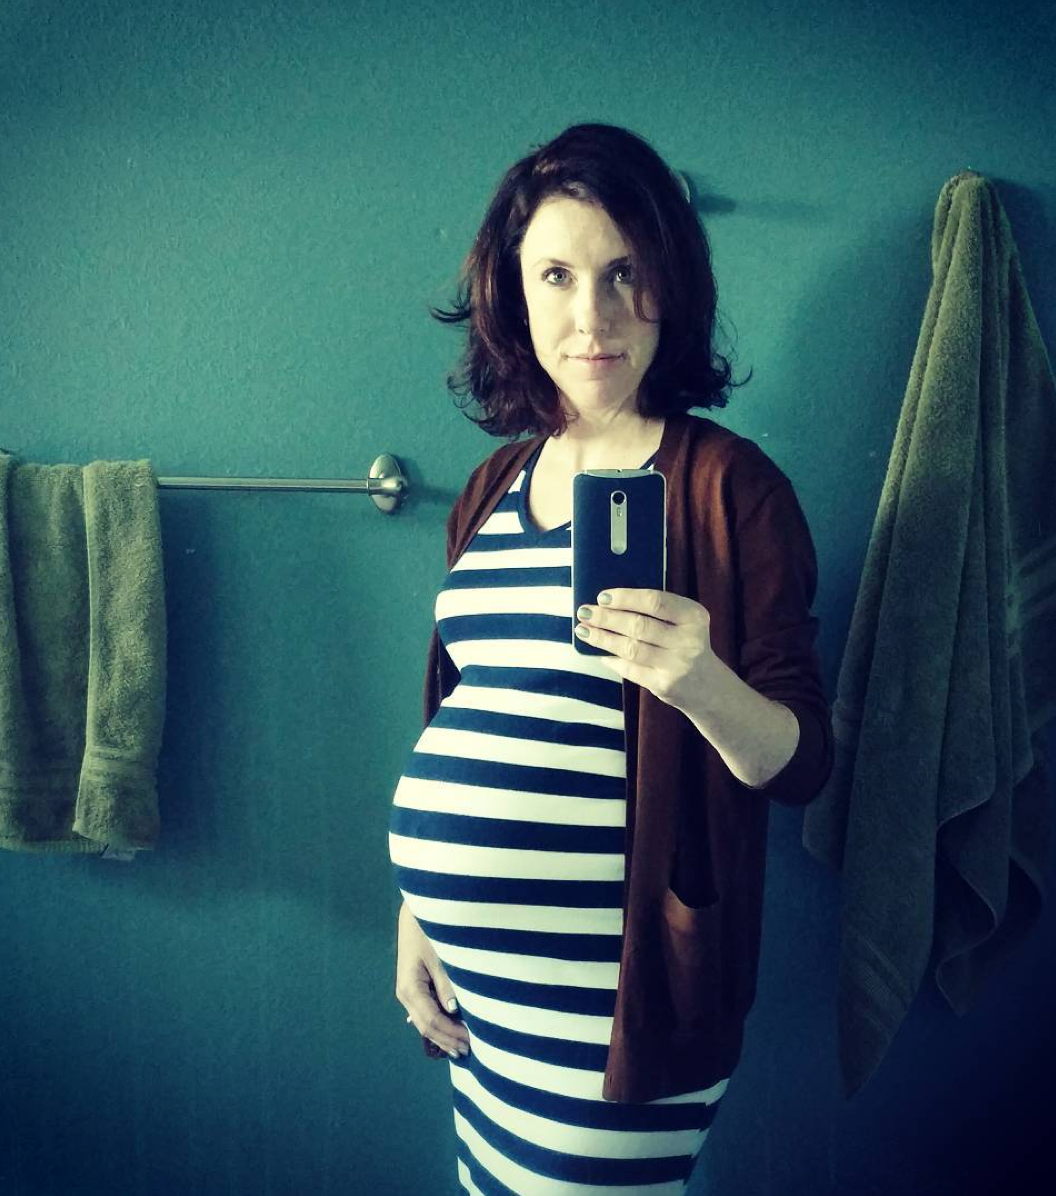 Stripes at 7 months pregnant